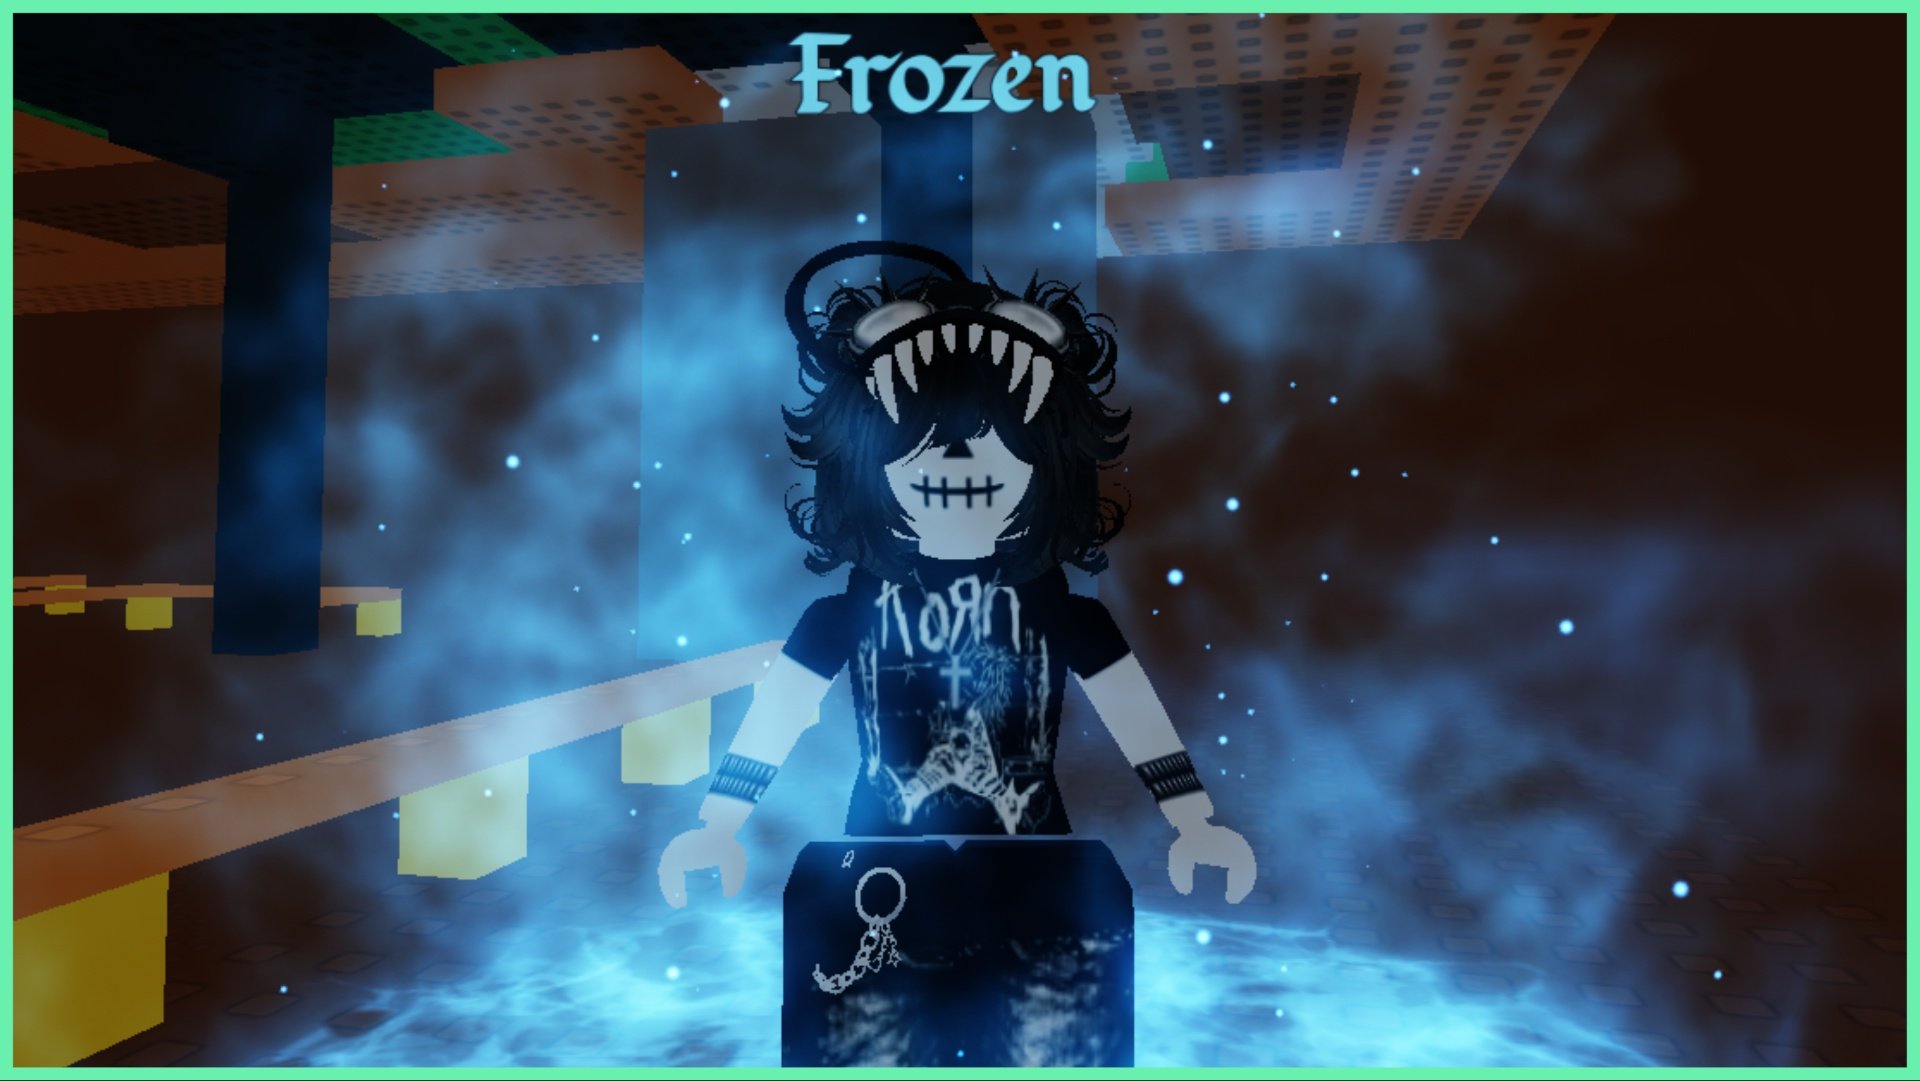 The image shows my avatar with the Frozen aura which shrouds her in a blue frosty air like element with blue sparkles. My avatar is facing directly into the camera and is stood inside a dark room